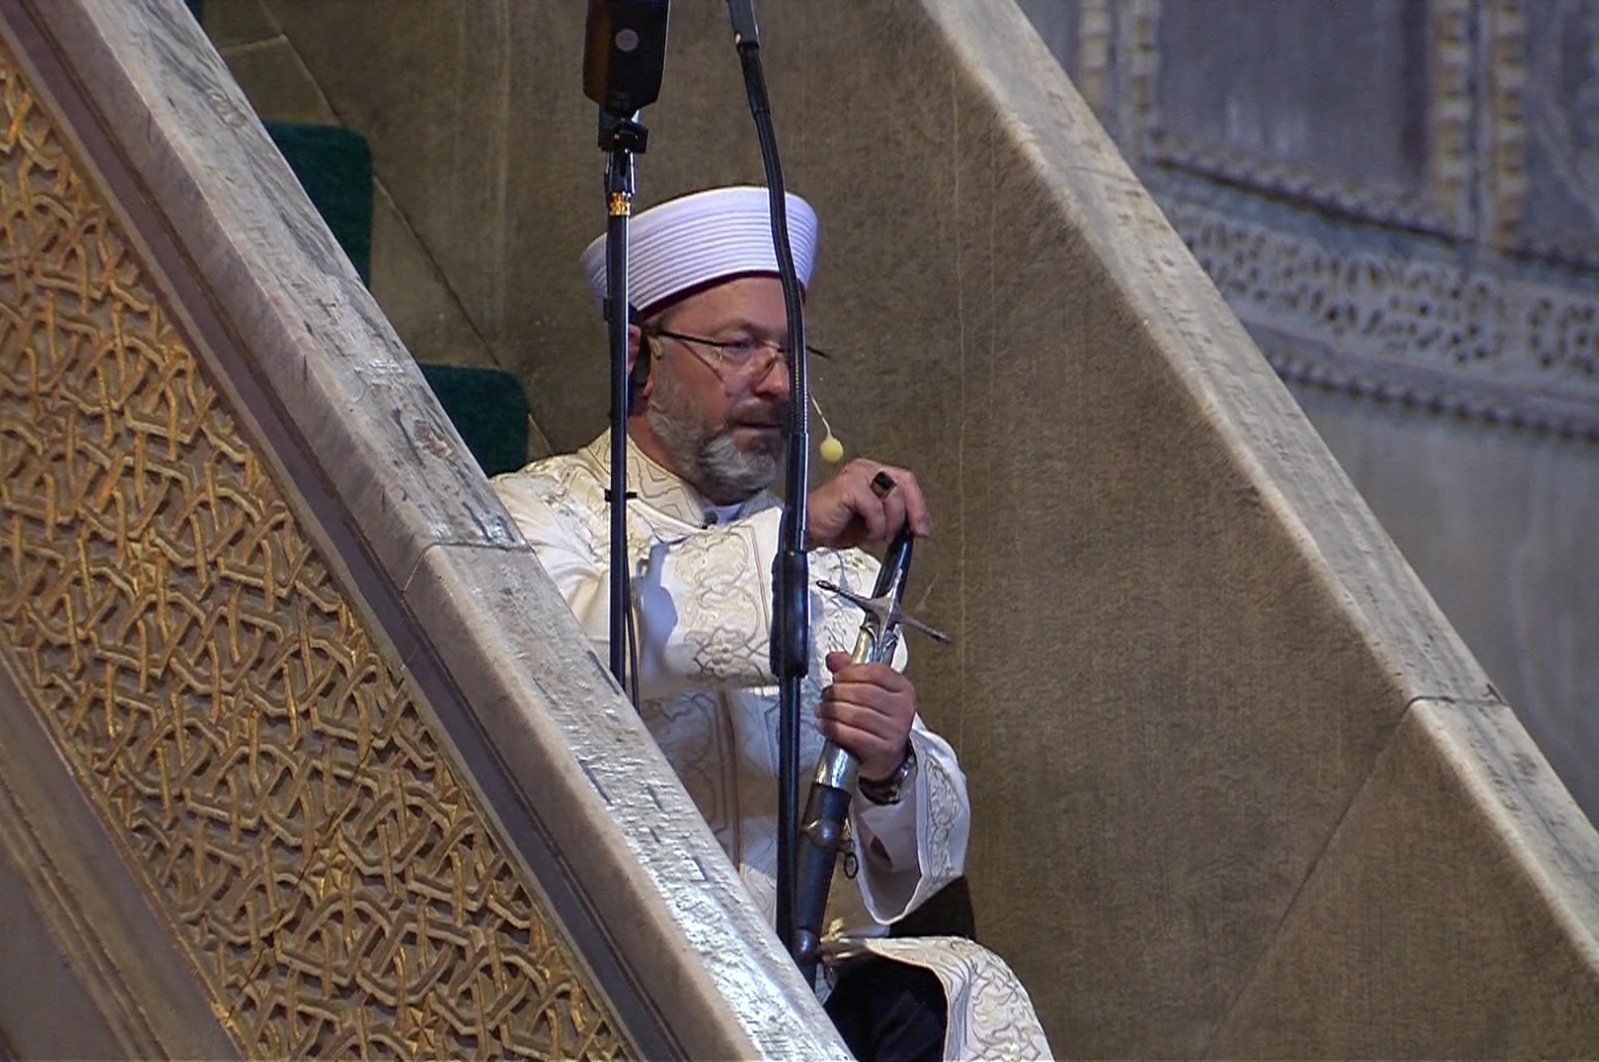 Head of Diyanet Ali Erbaş delivers first sermon in the Hagia Sophia Grand mosque with a sword, July 24, 2020 (DHA Photo)